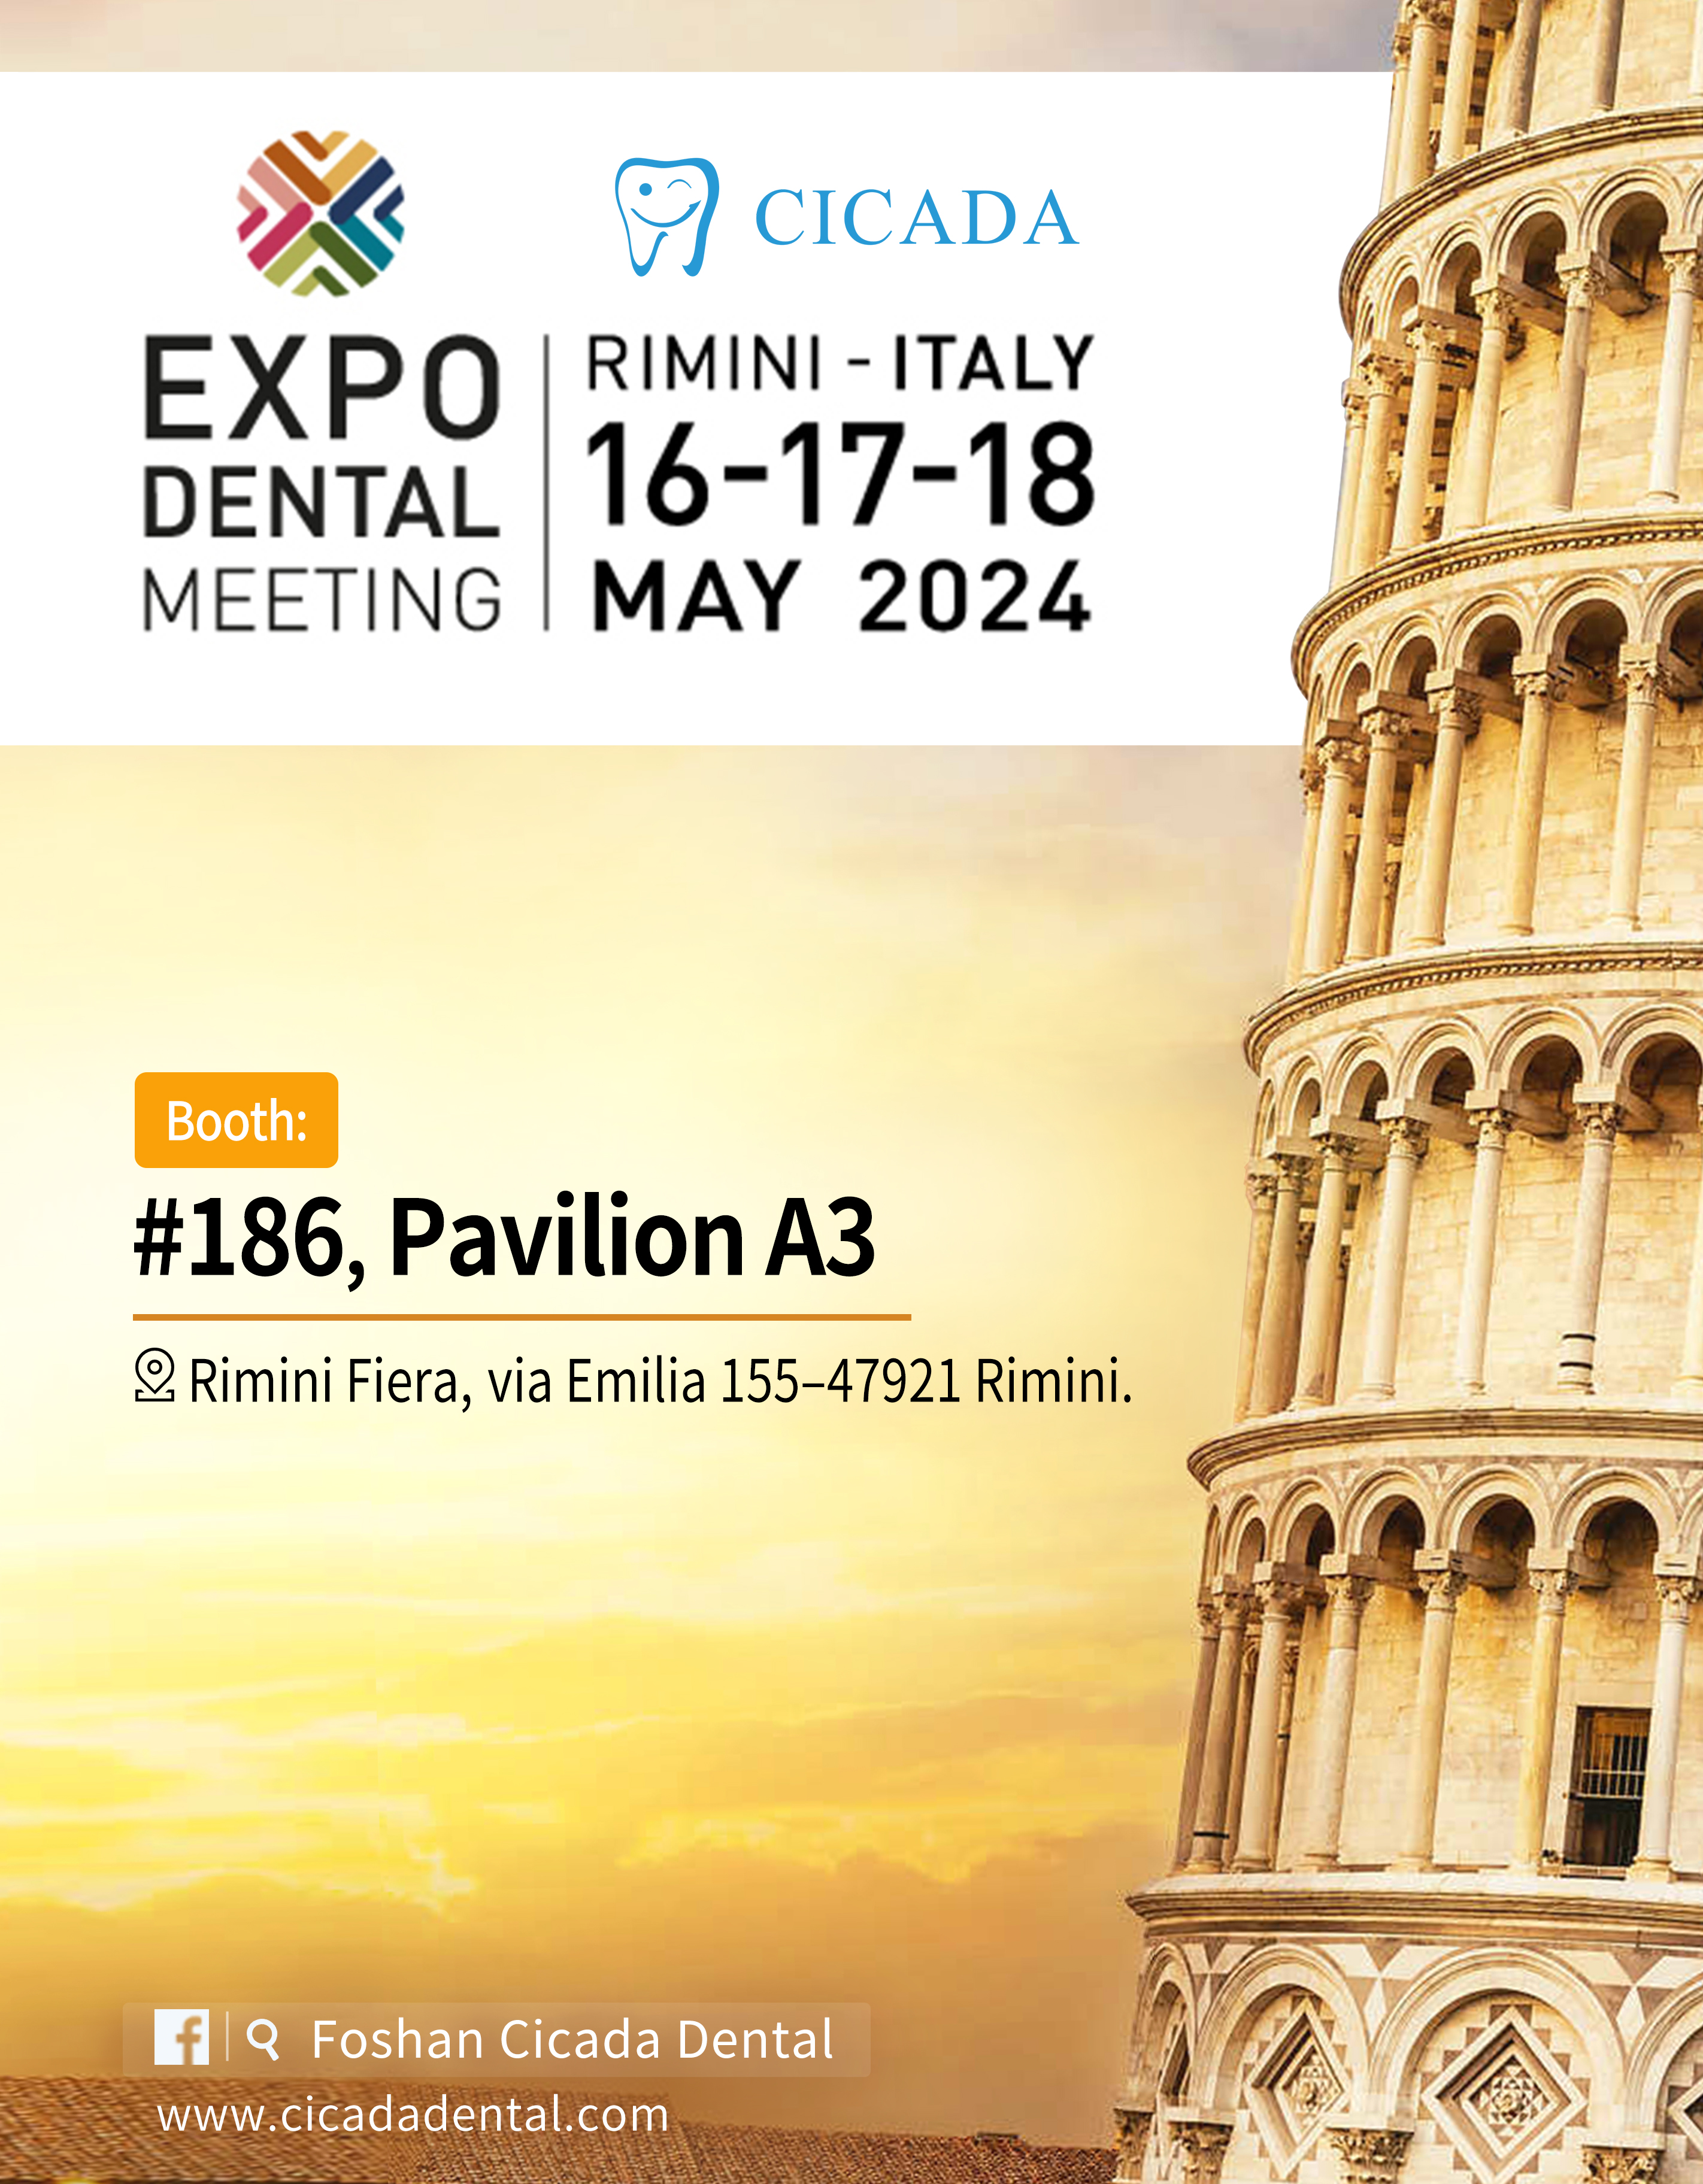 Meet CICADA in Rimini for Expodent Meeting 2024